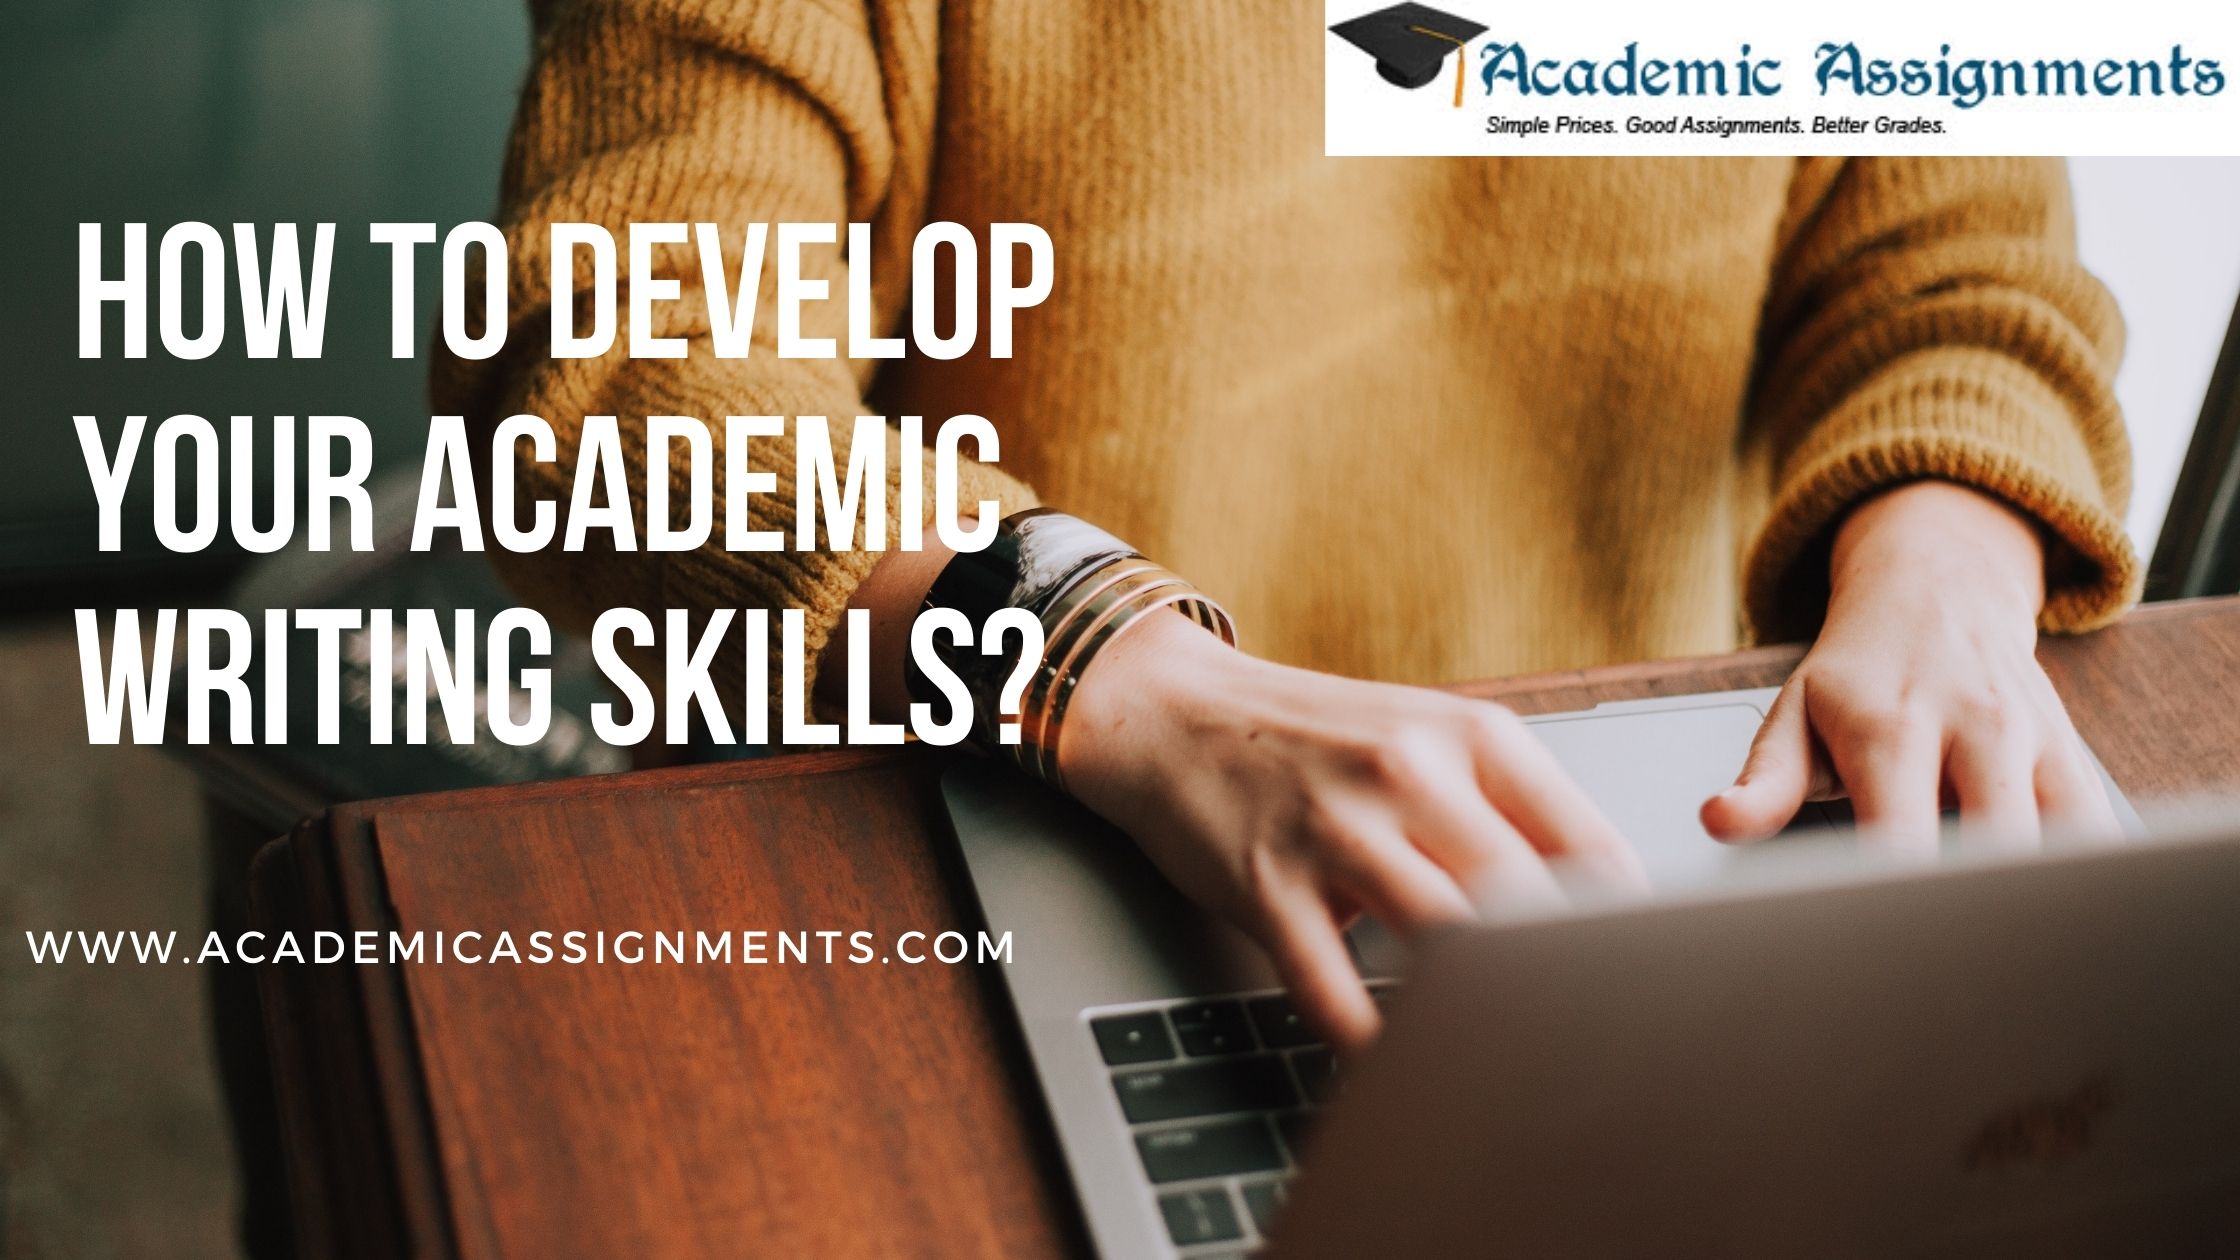 HOW TO DEVELOP YOUR ACADEMIC WRITING SKILLS